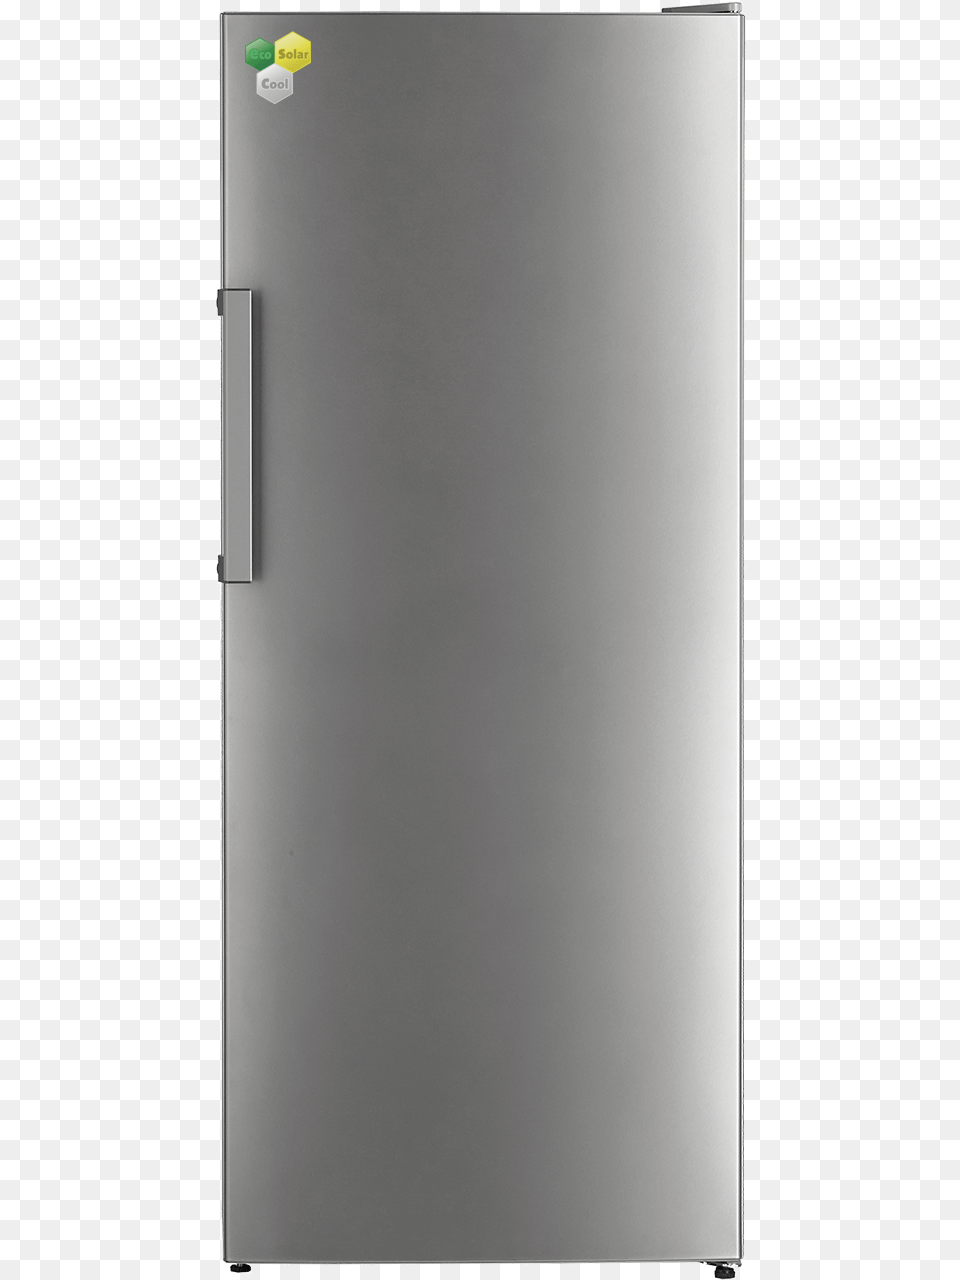 Refrigerator Transparent Images Refrigerator, Appliance, Device, Electrical Device, White Board Png Image